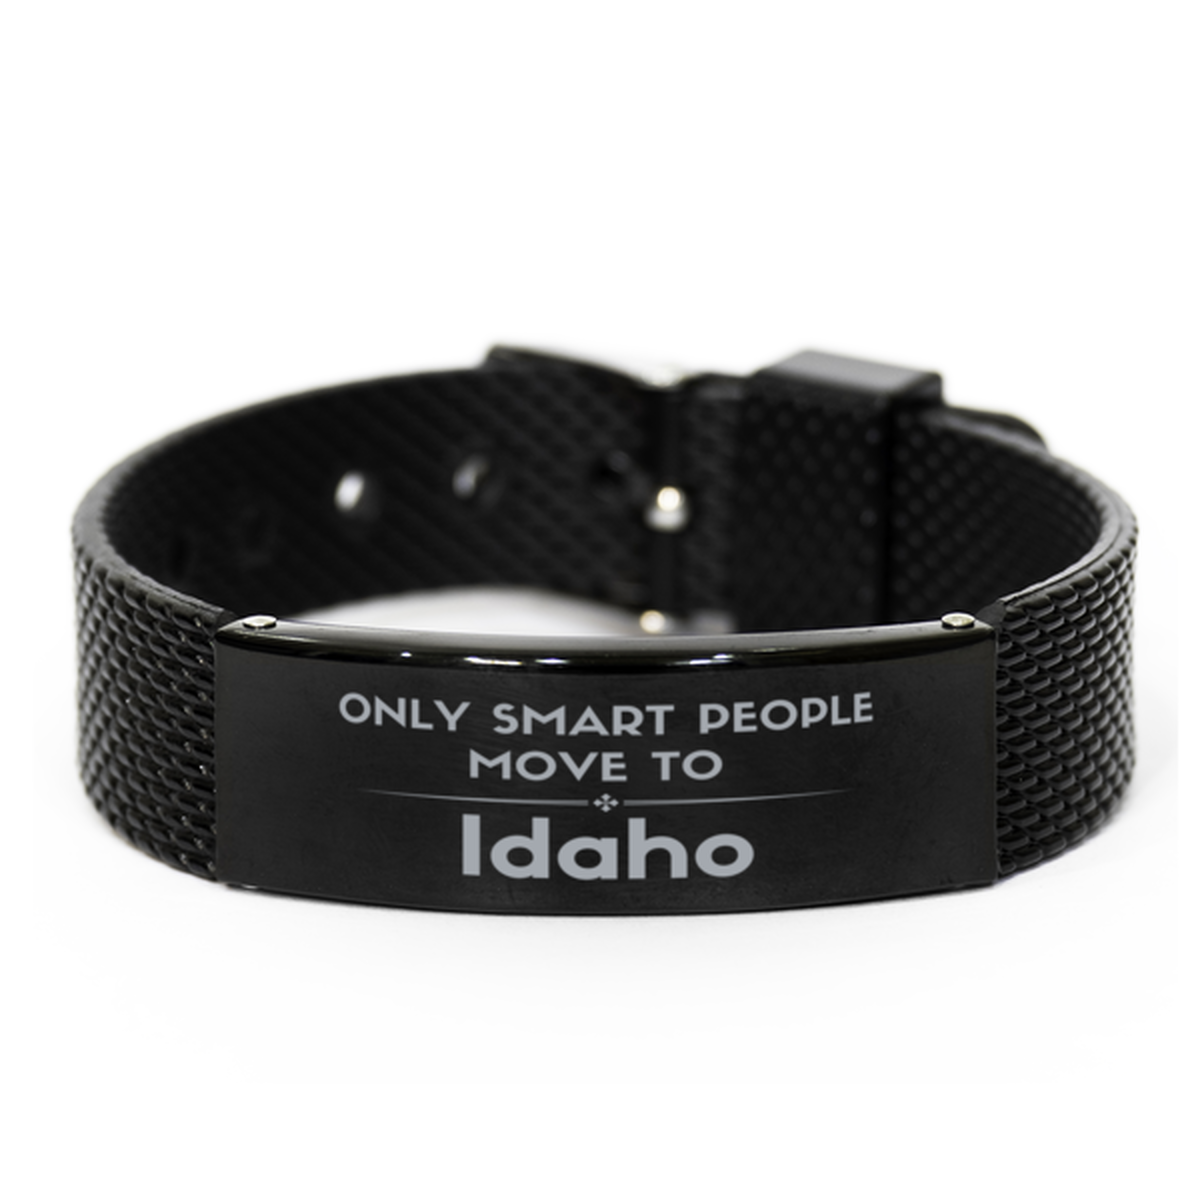 Only smart people move to Idaho Black Shark Mesh Bracelet, Gag Gifts For Idaho, Move to Idaho Gifts for Friends Coworker Funny Saying Quote